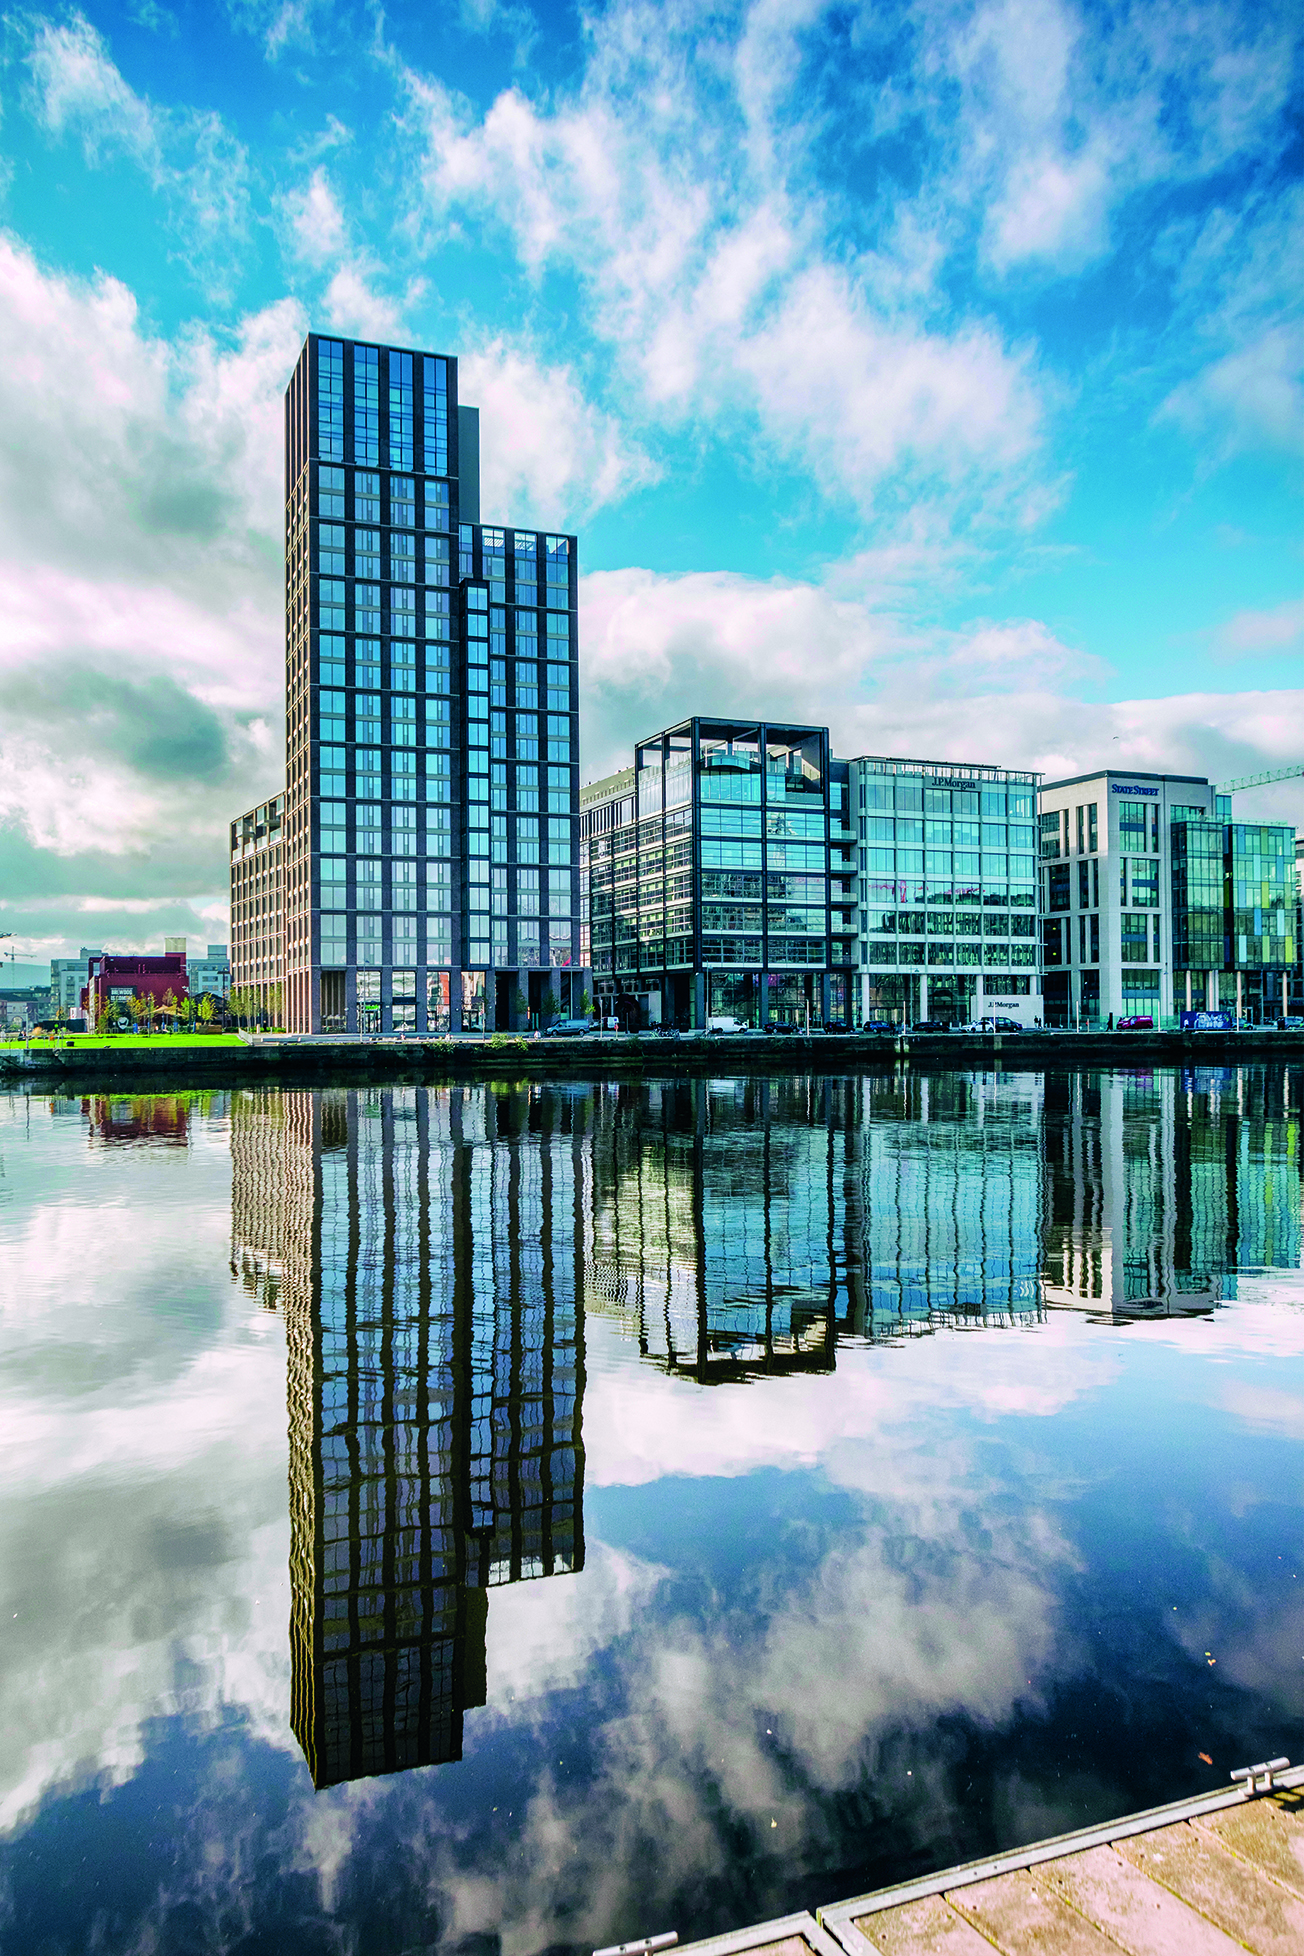 Image of tall buildings with reflection in the Liffey